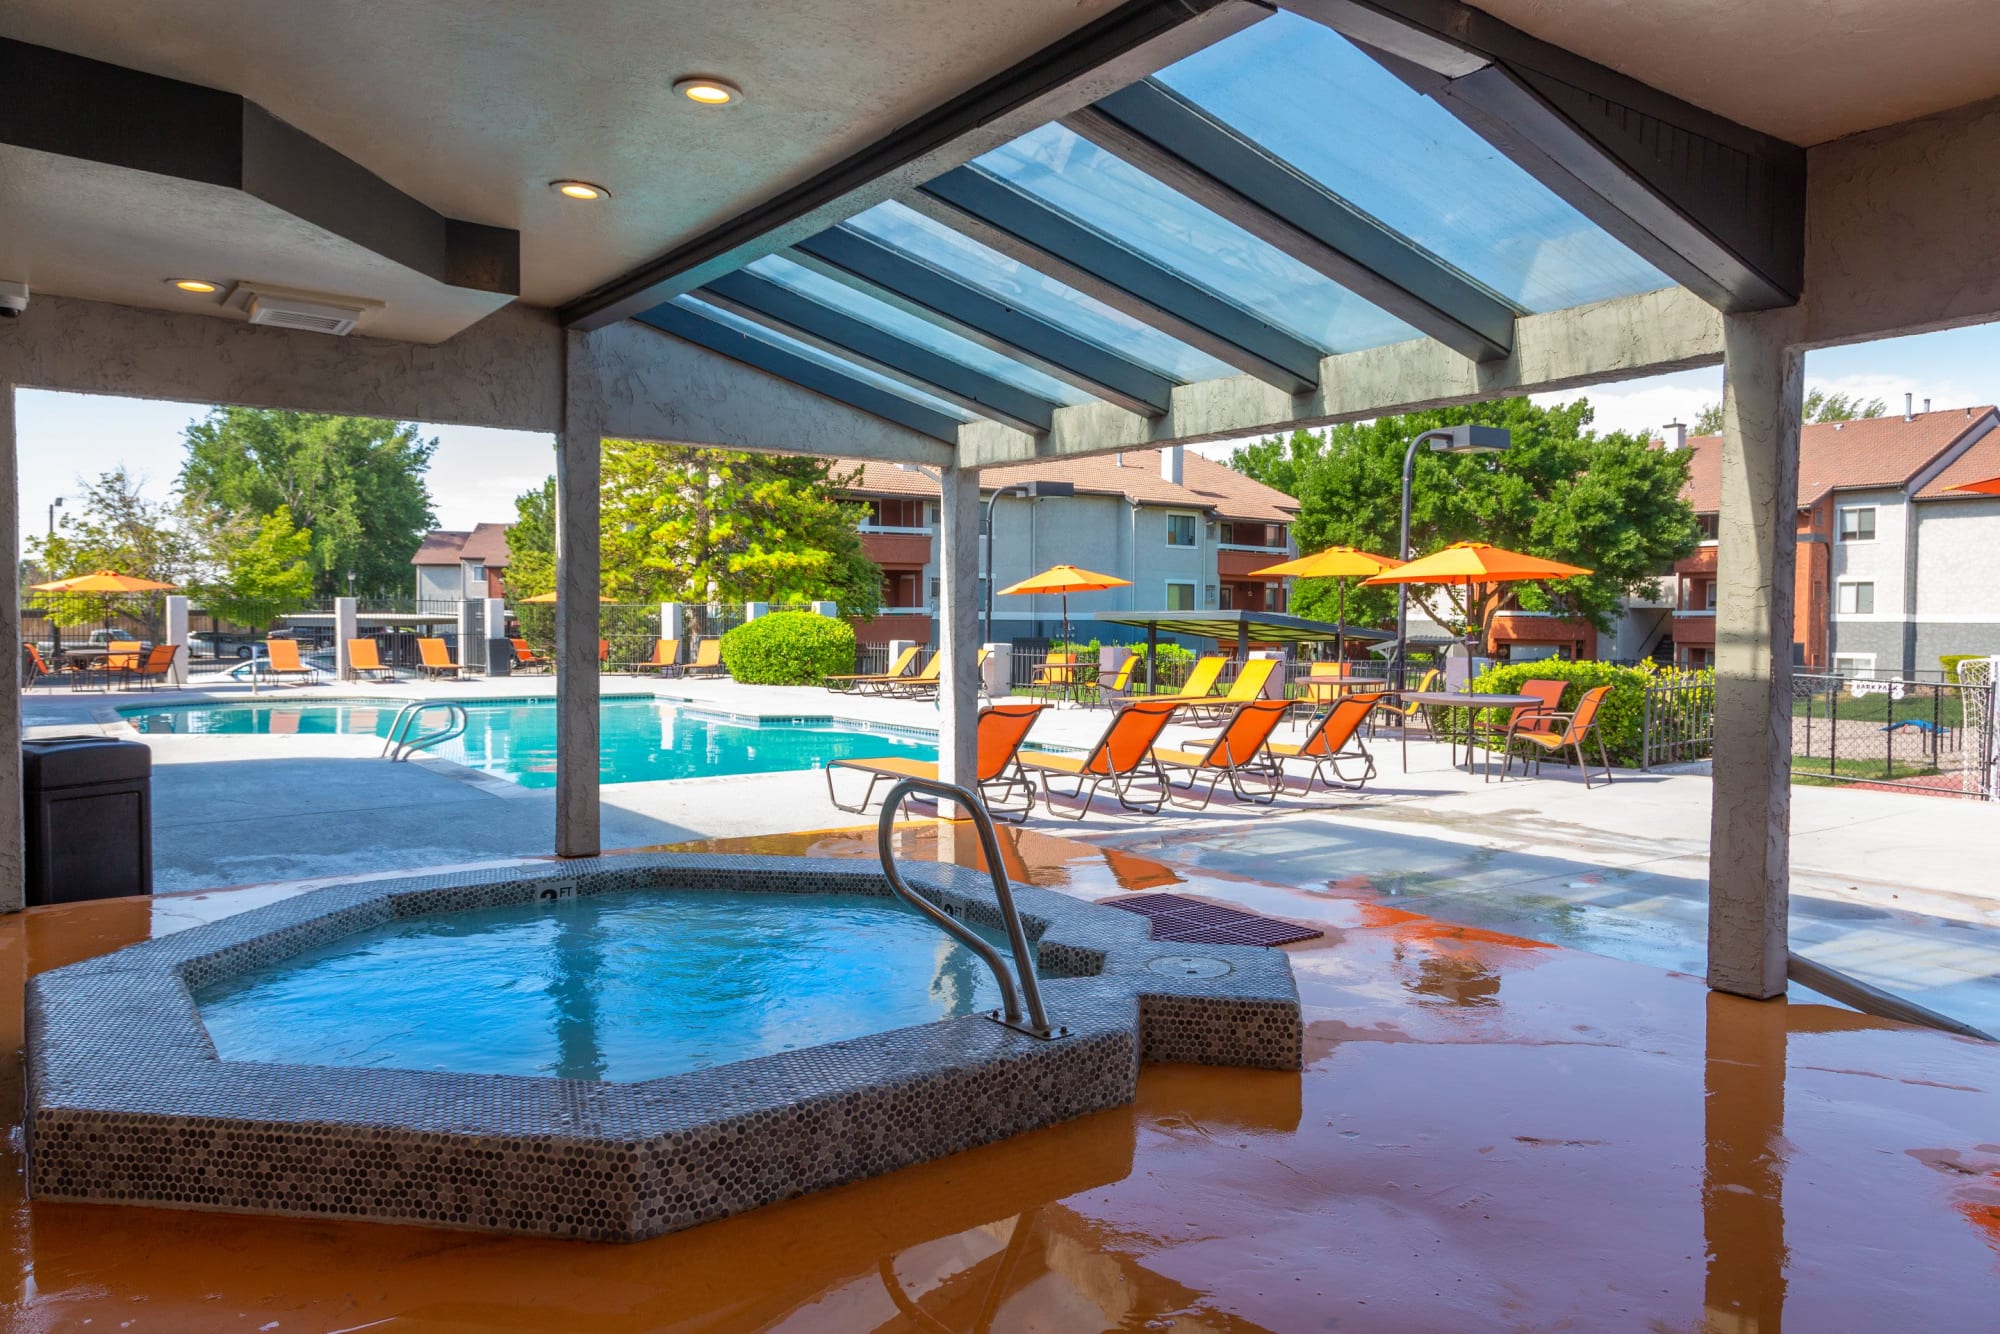 Spa at Shadowbrook Apartments in West Valley City, Utah